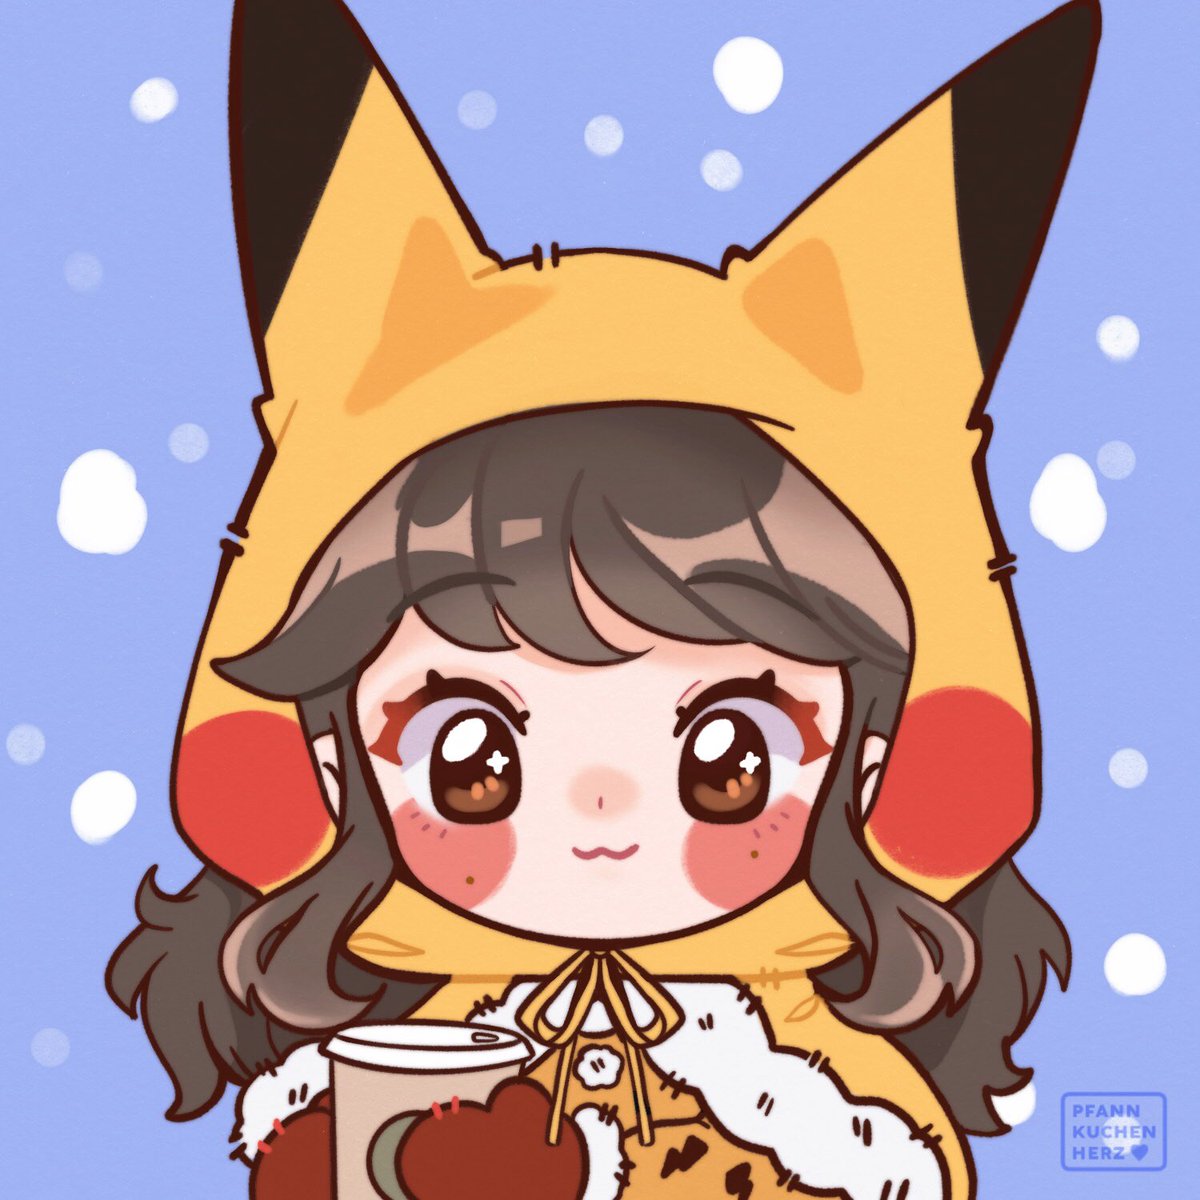 「It's time for a cozy icon (*'꒳`*) 」|yvie 🥞💜 (semi hiatus)のイラスト